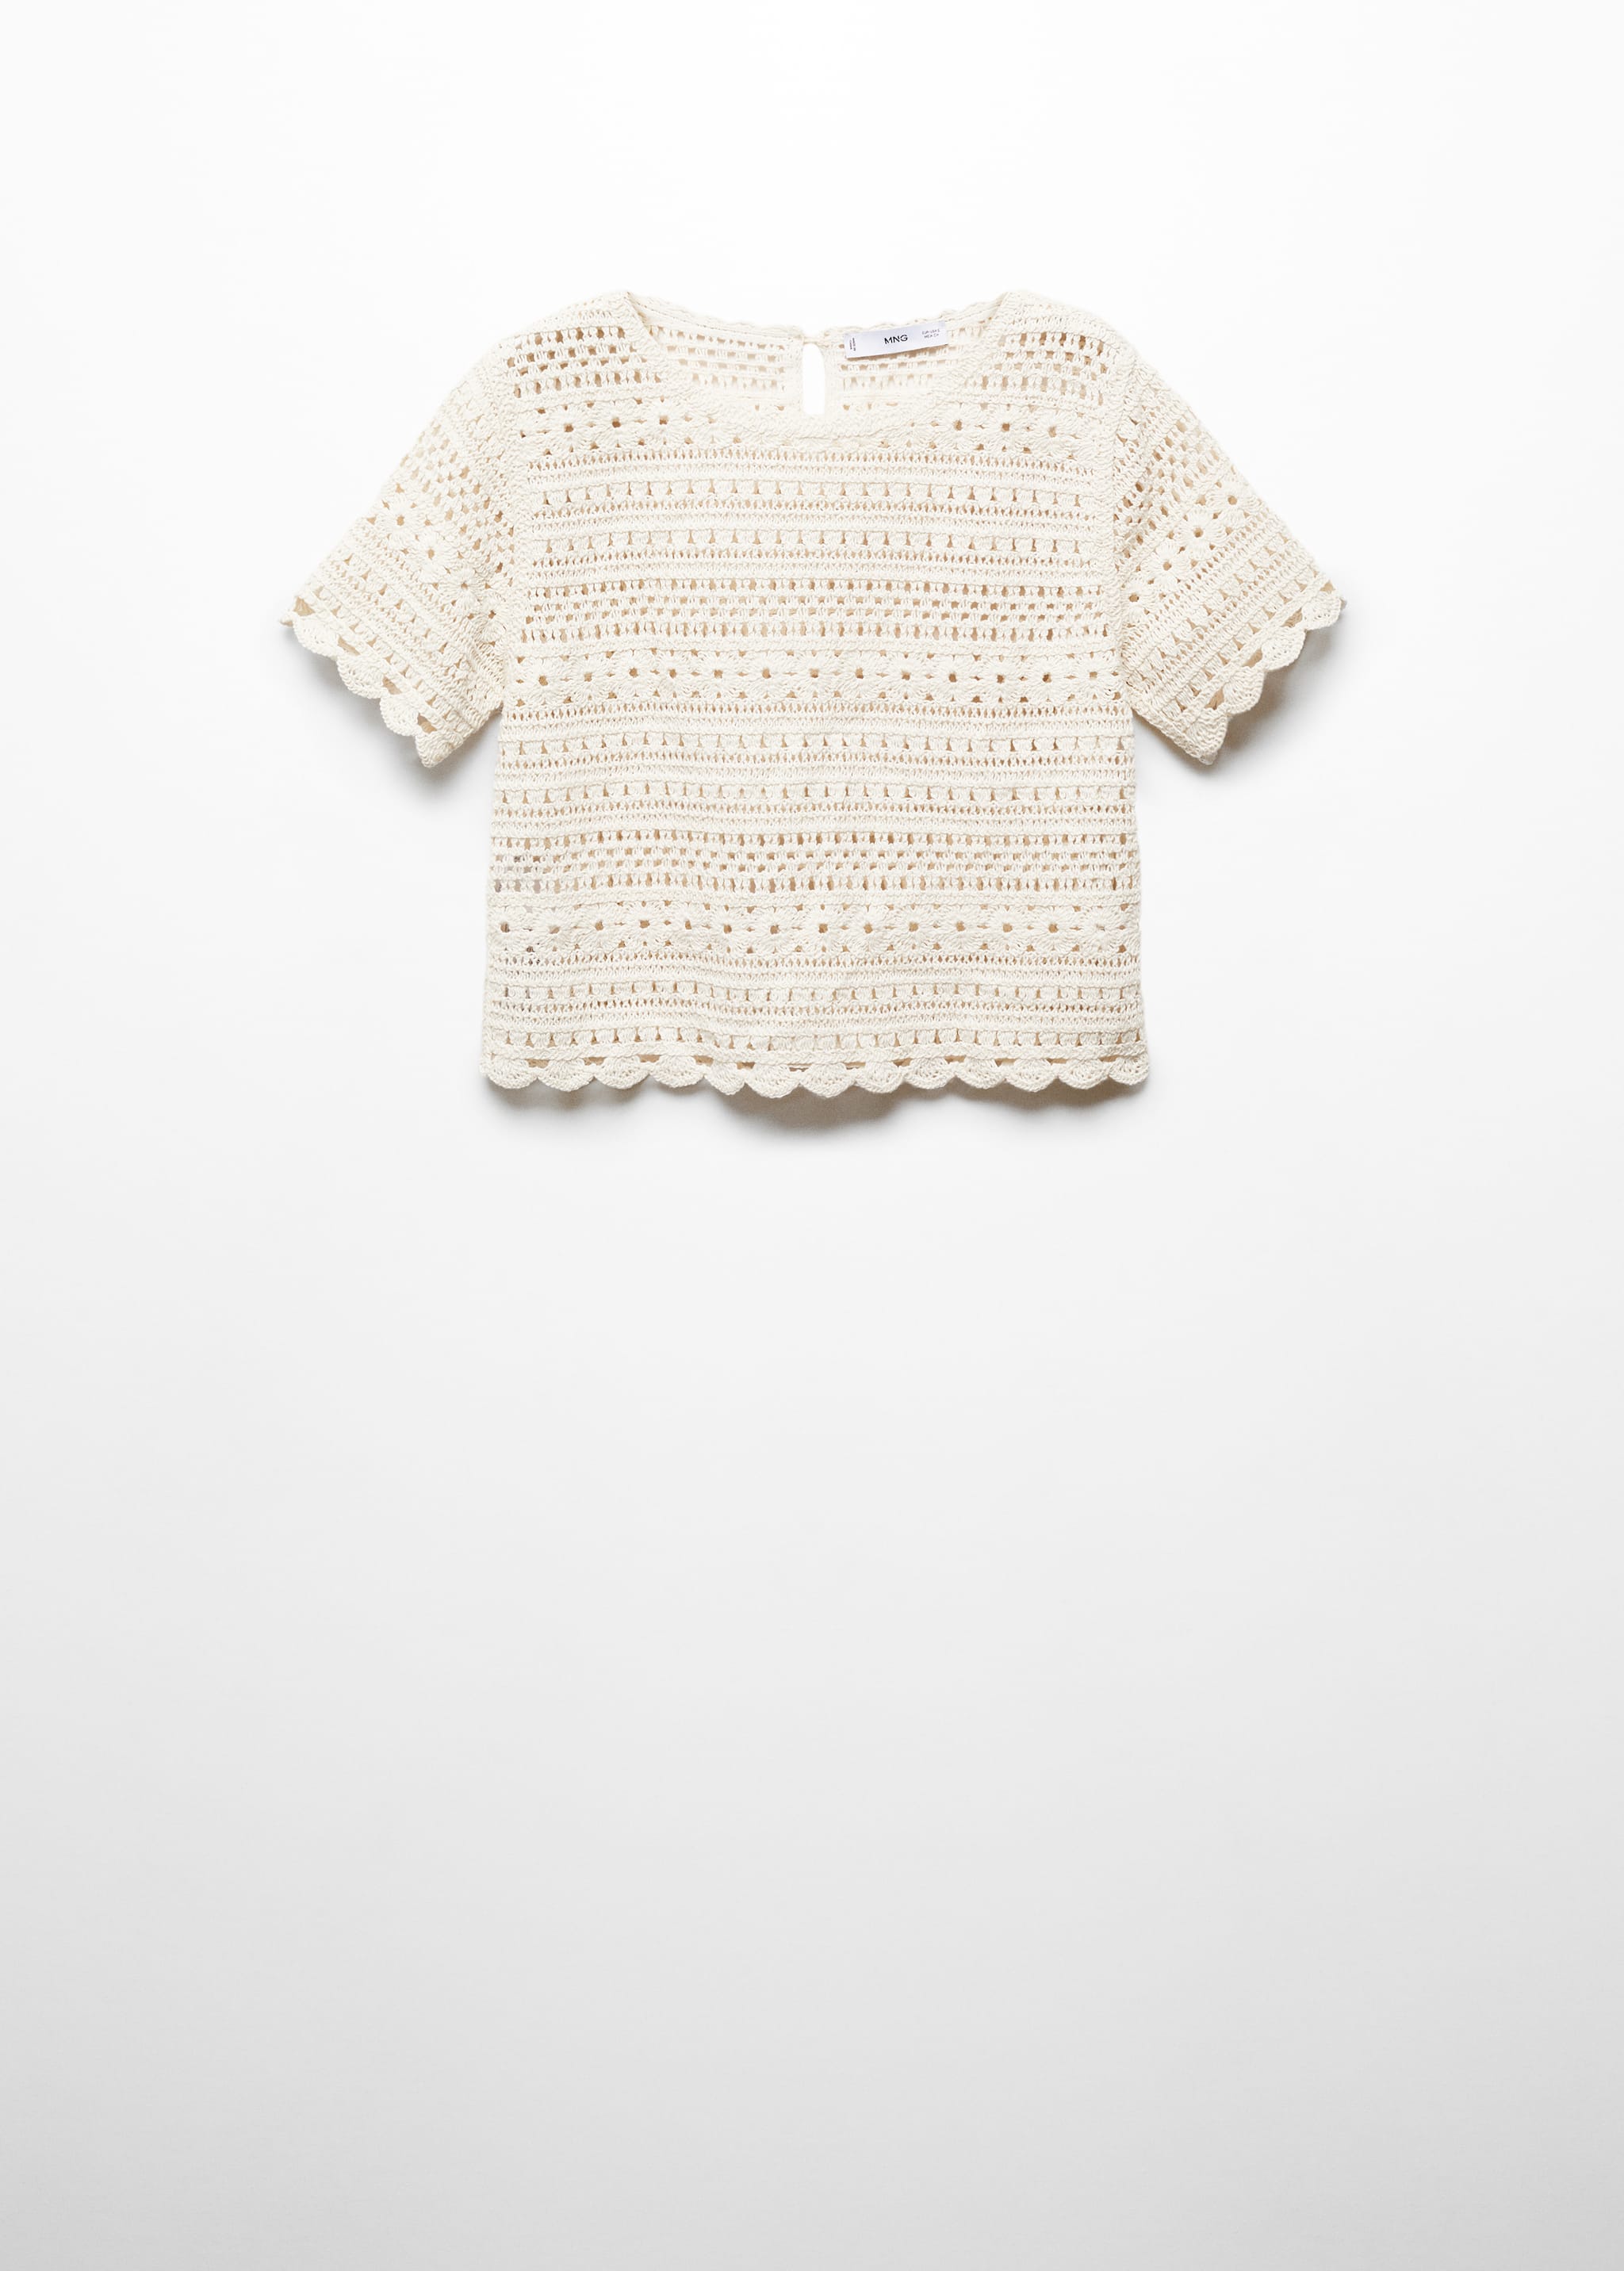 Knitted sweater with openwork details - Article without model